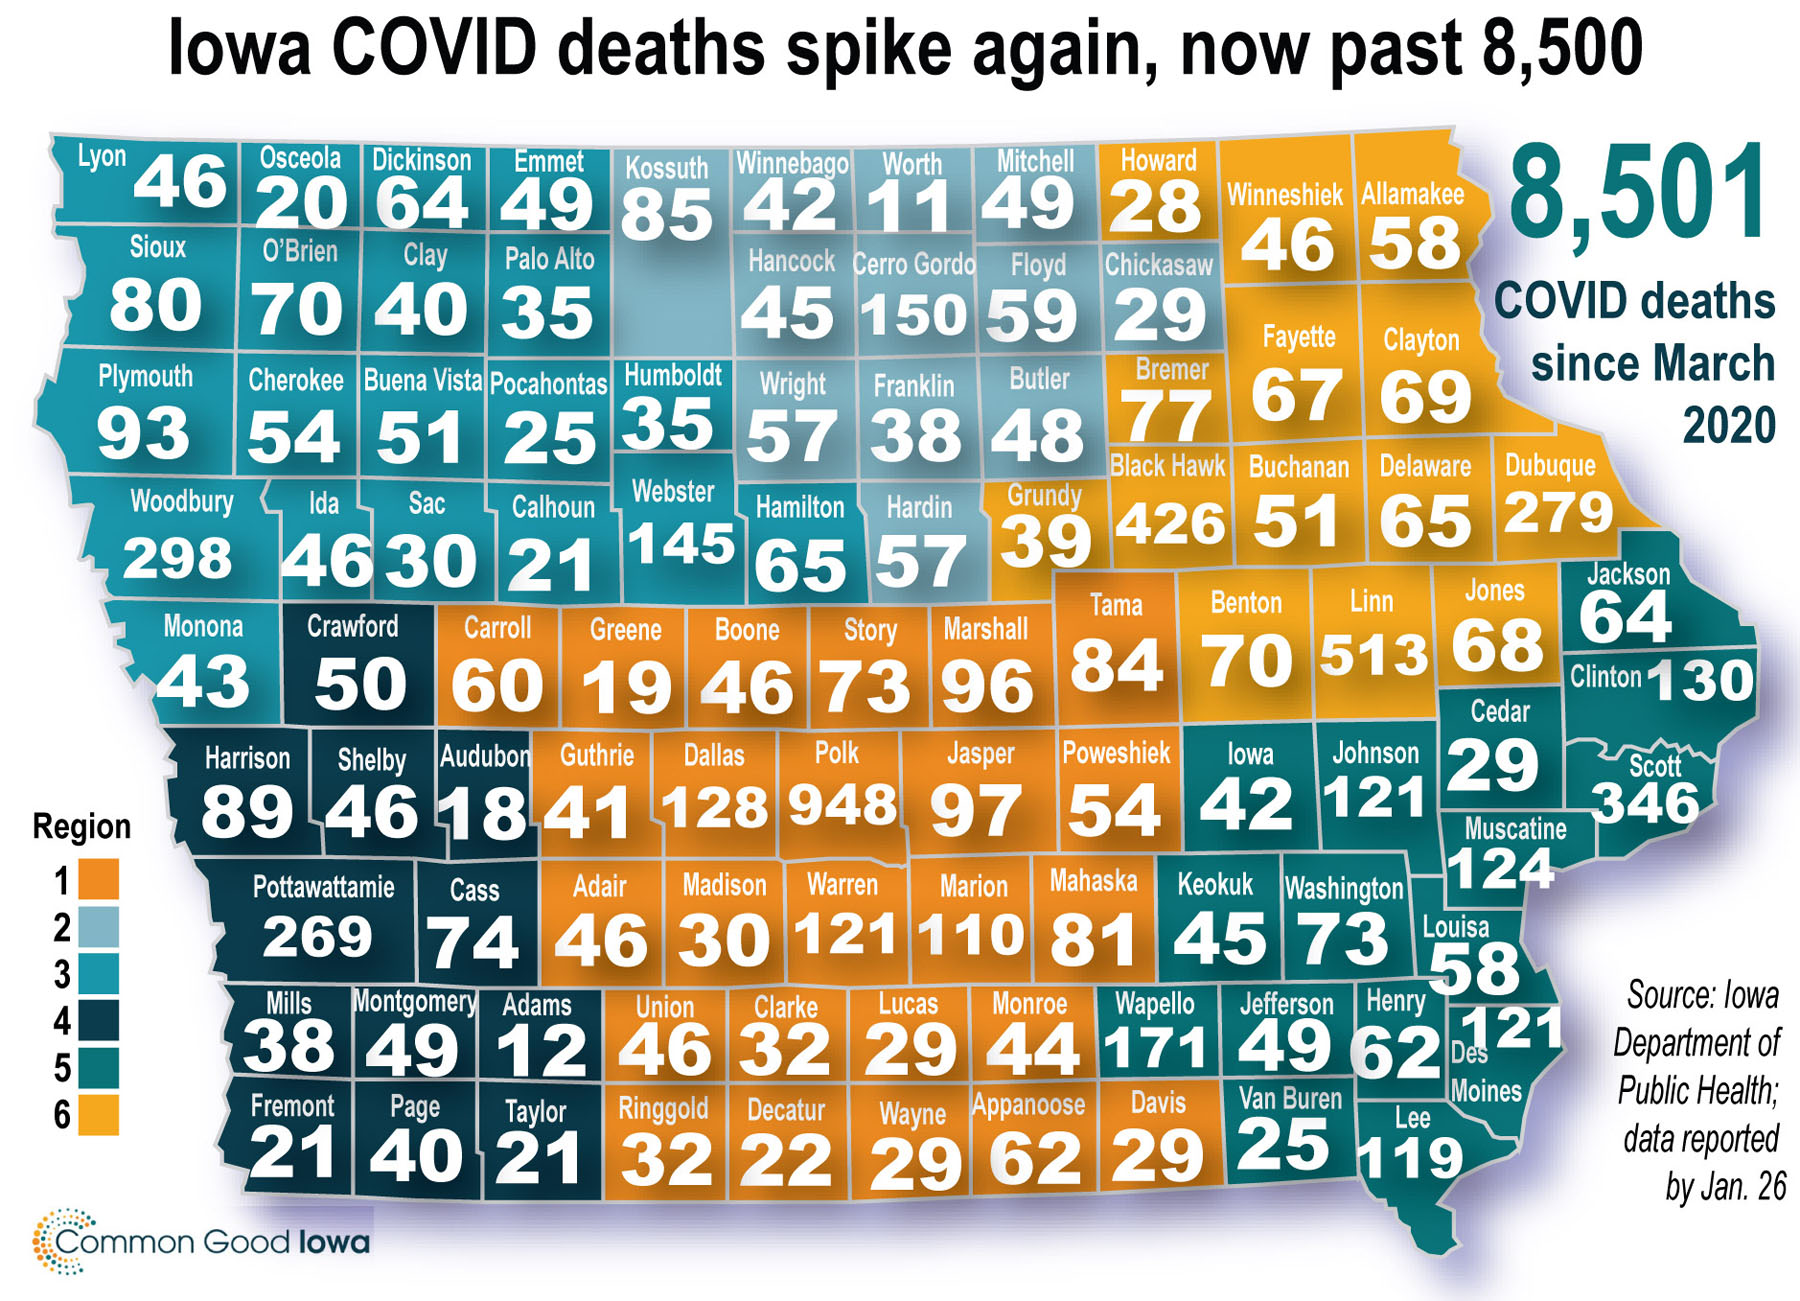 County by county COVID deaths as of Jan. 26